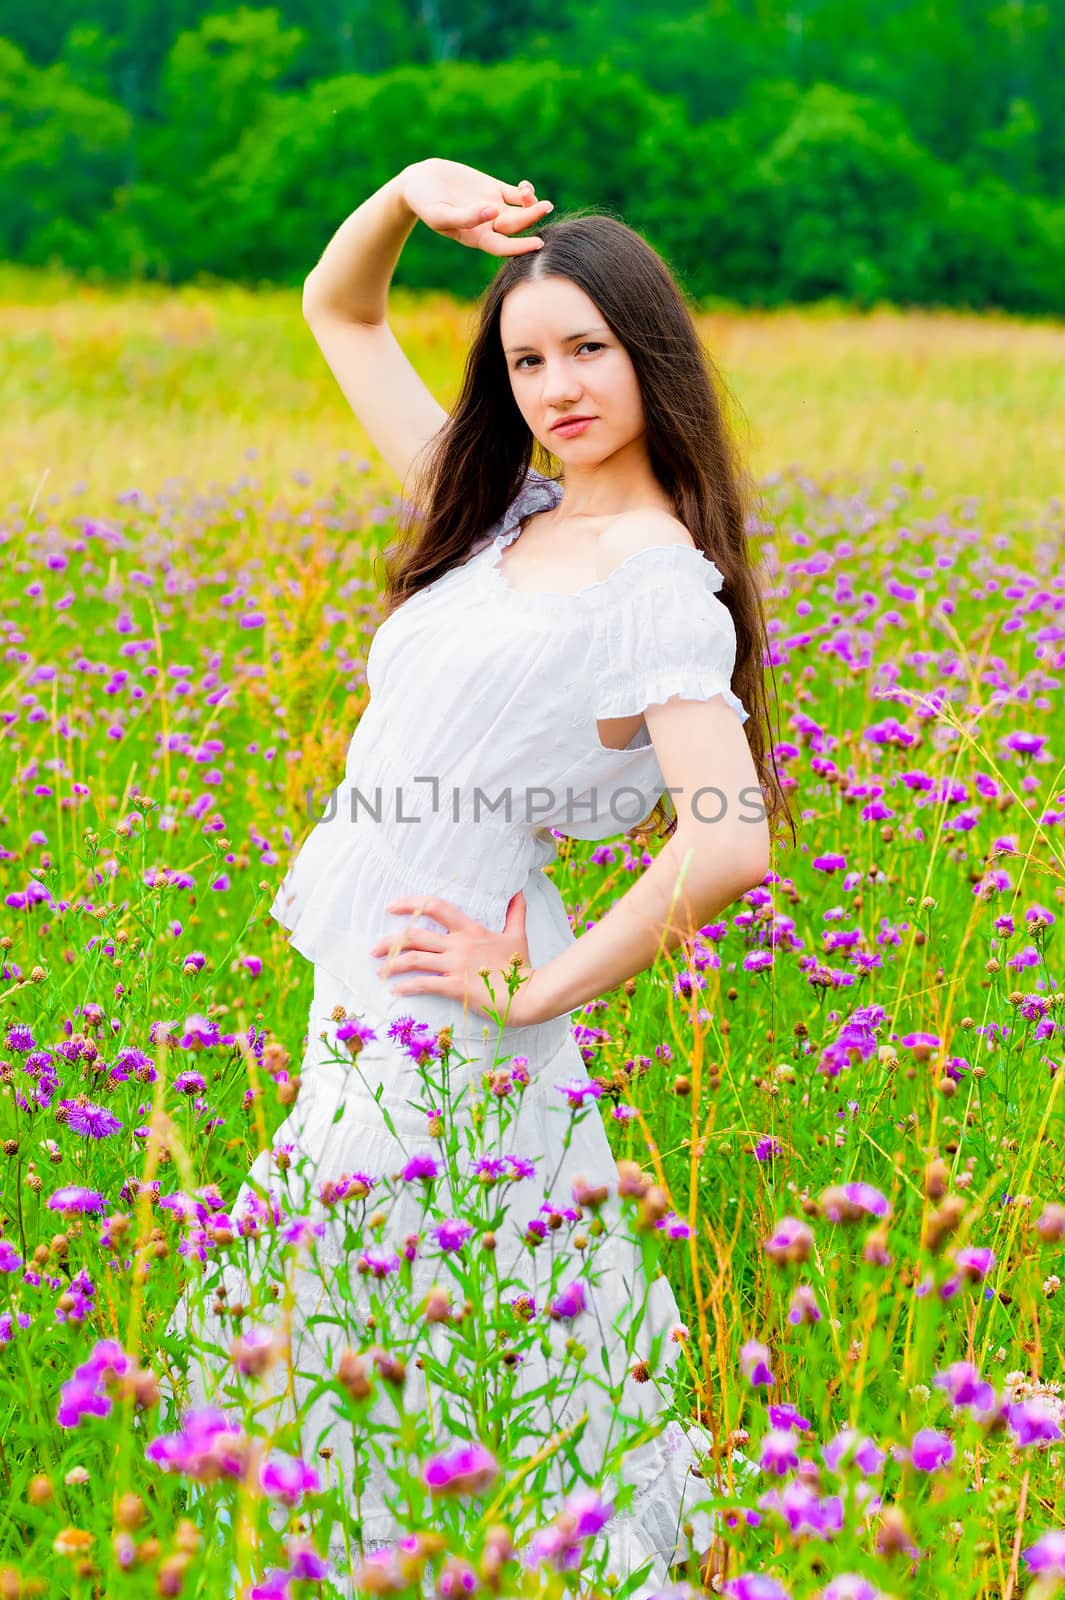 beautiful woman posing in a field with flowers by kosmsos111